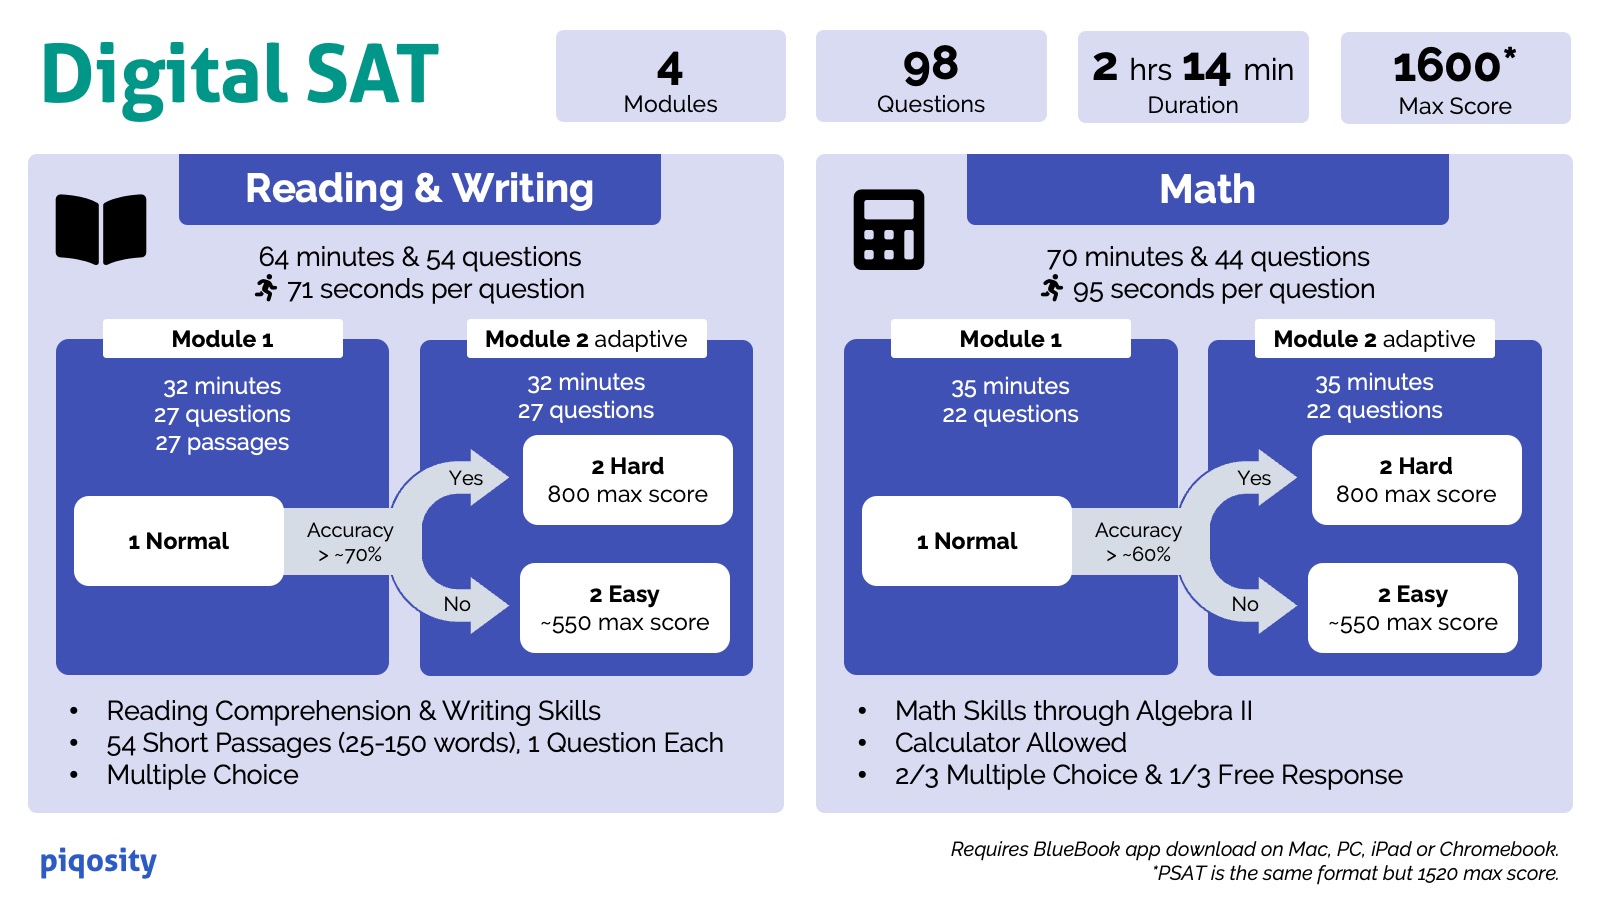 Digital SAT Infographic showing format, adaptive modules, question counts, and timing.